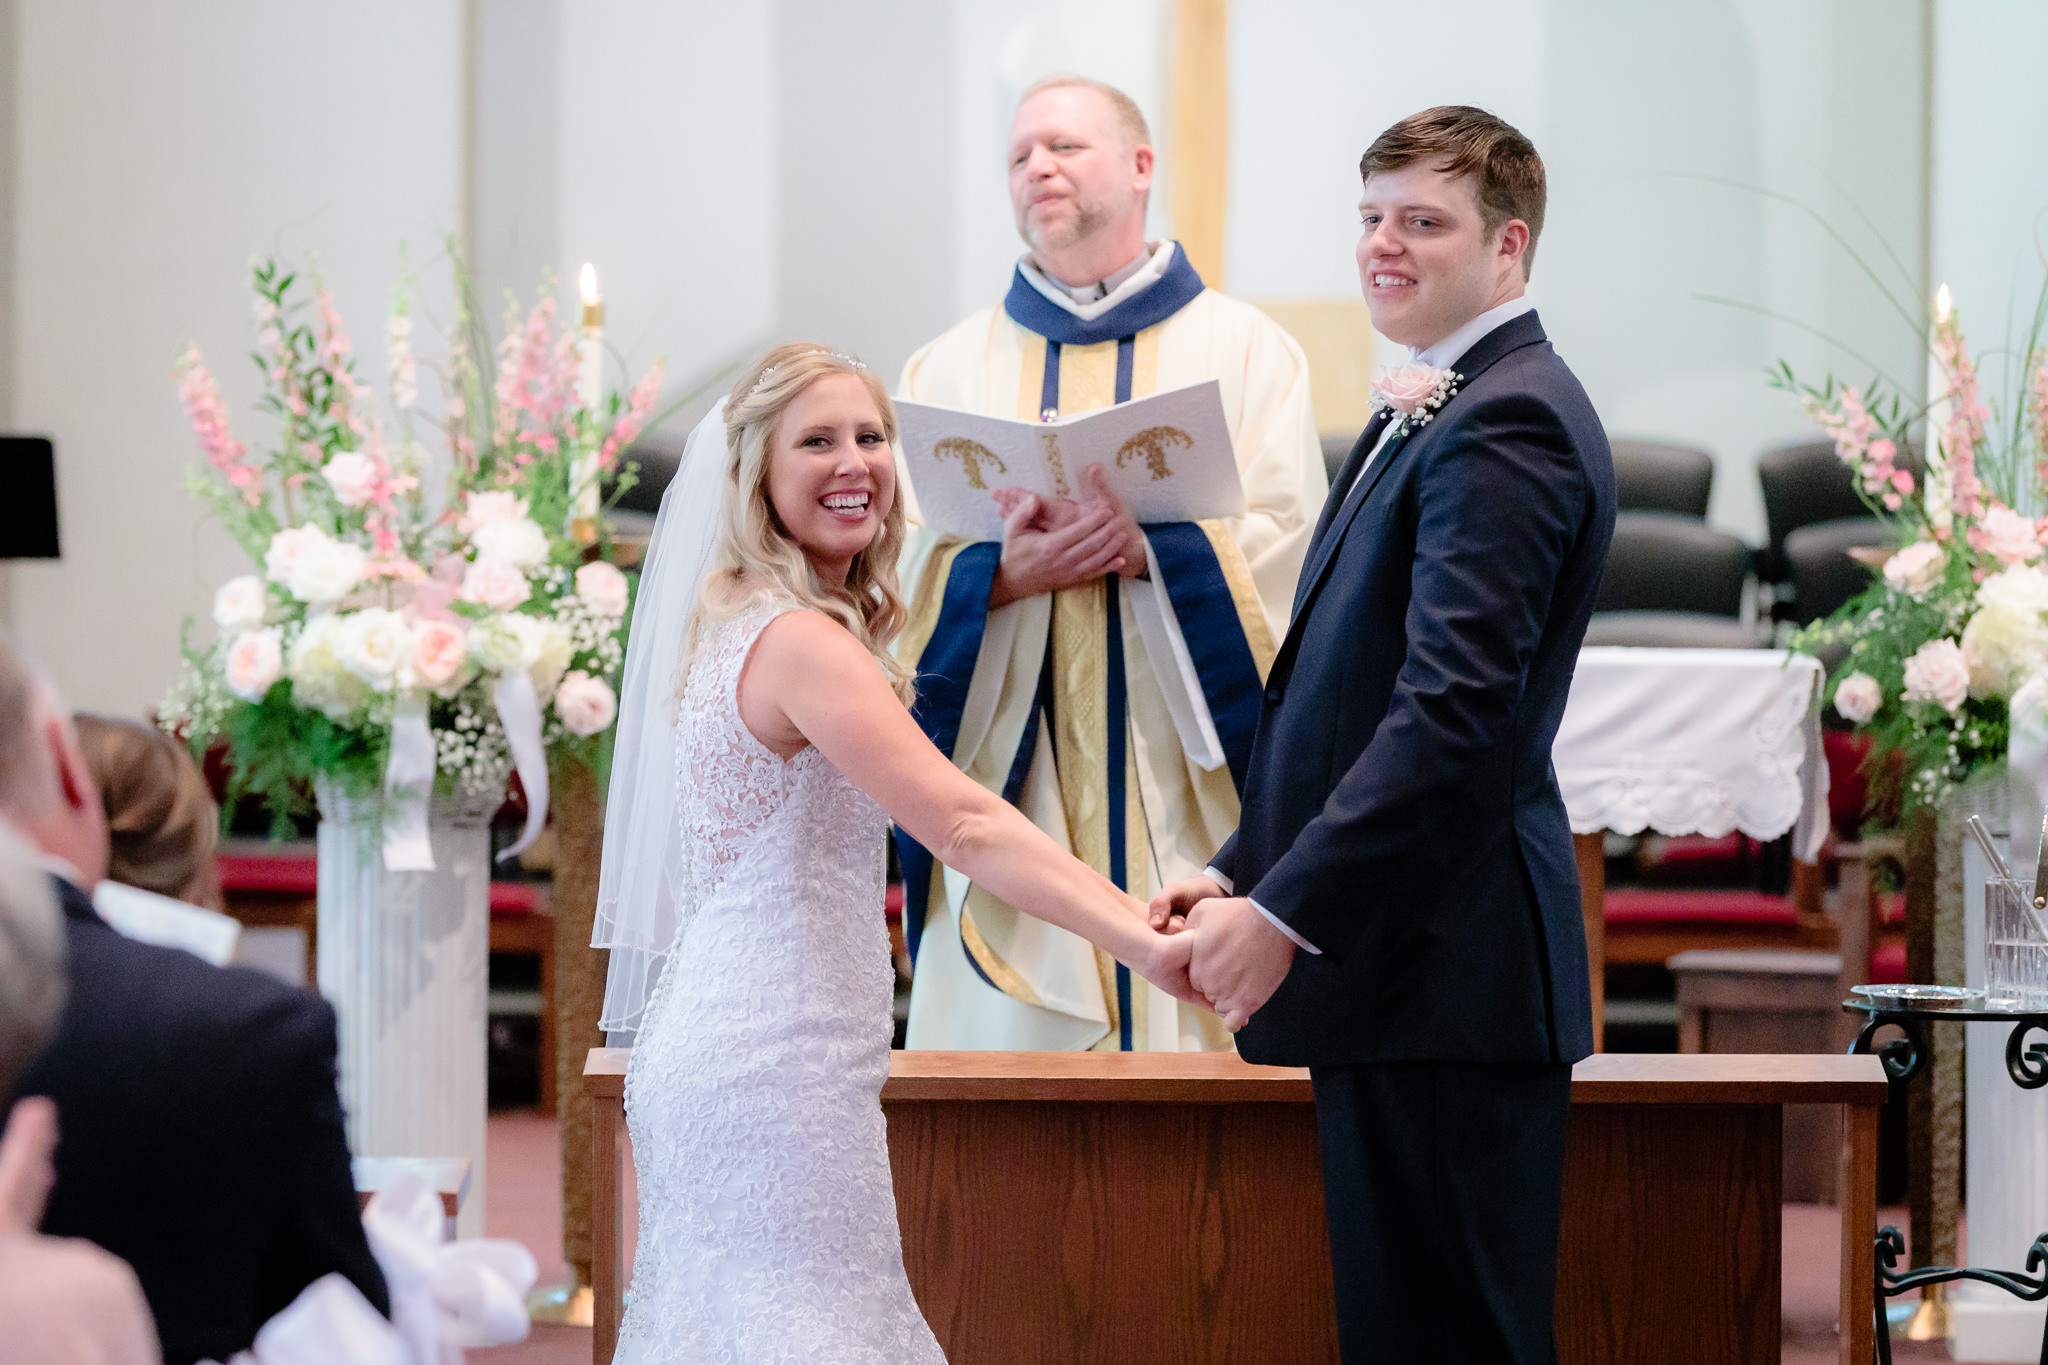 Bride & groom smile at guests during their Duquesne University wedding ceremony